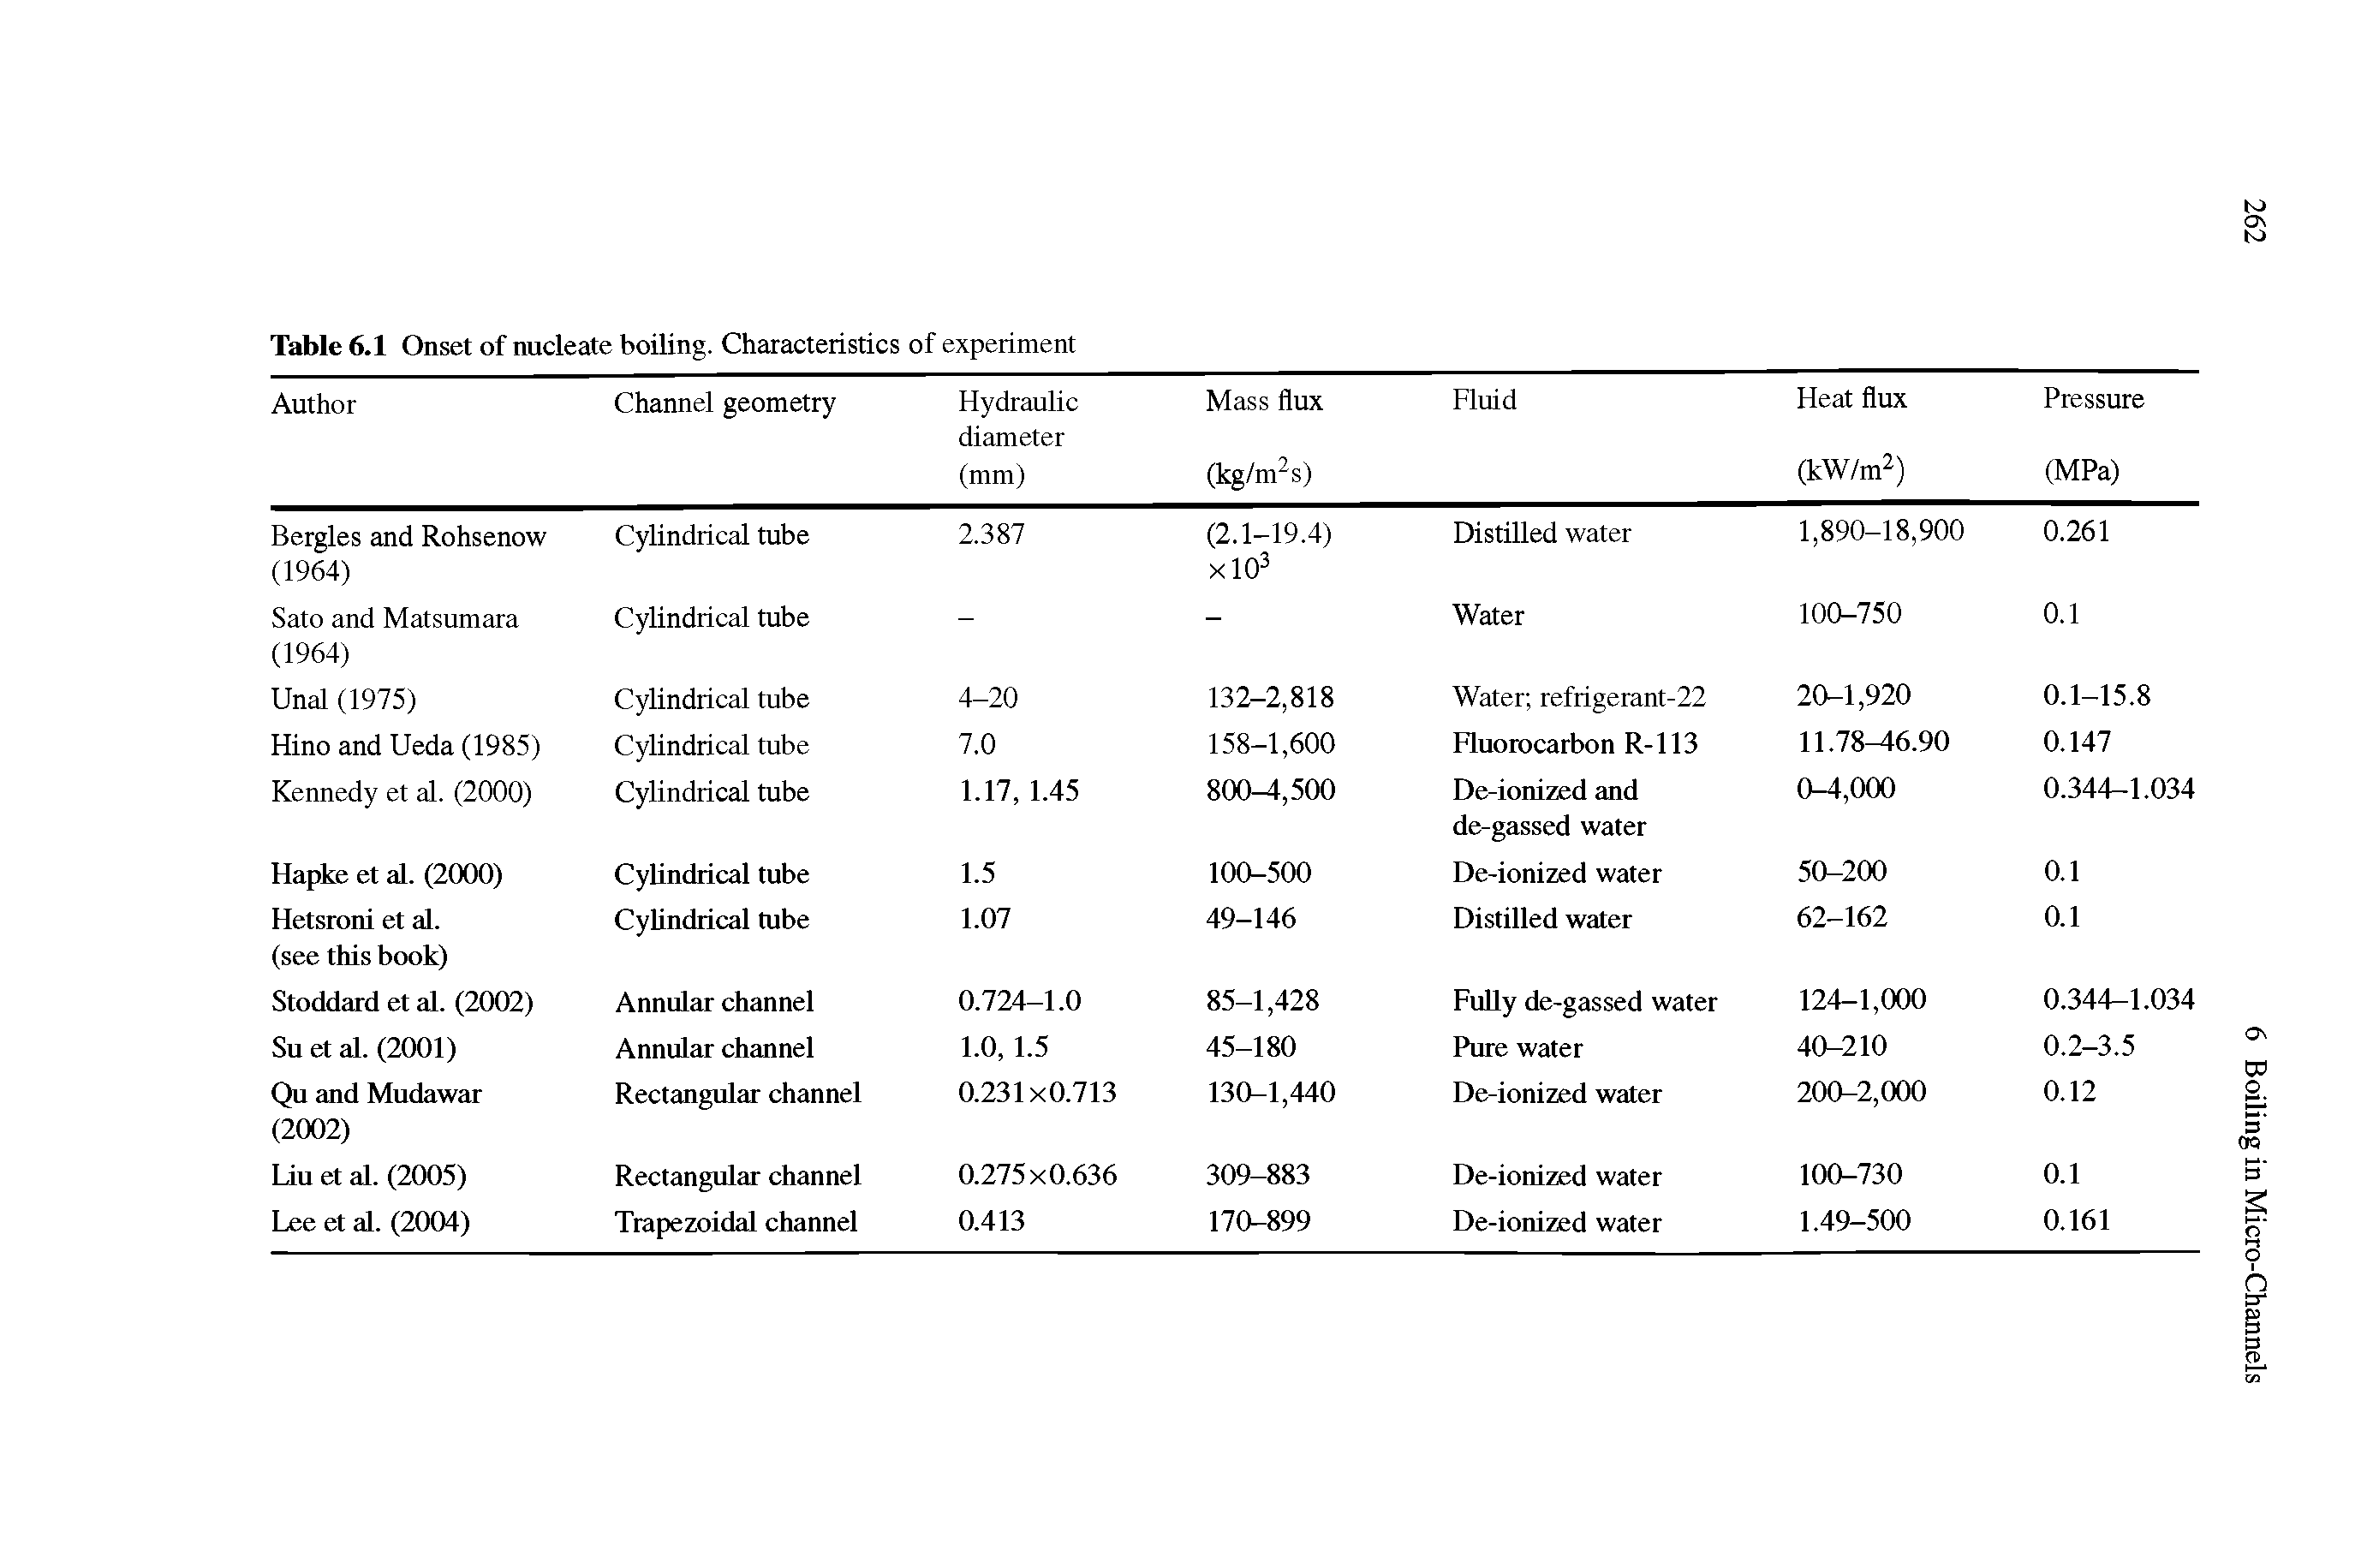 Table 6.1 Onset of nucleate boiling. Characteristics of experiment...